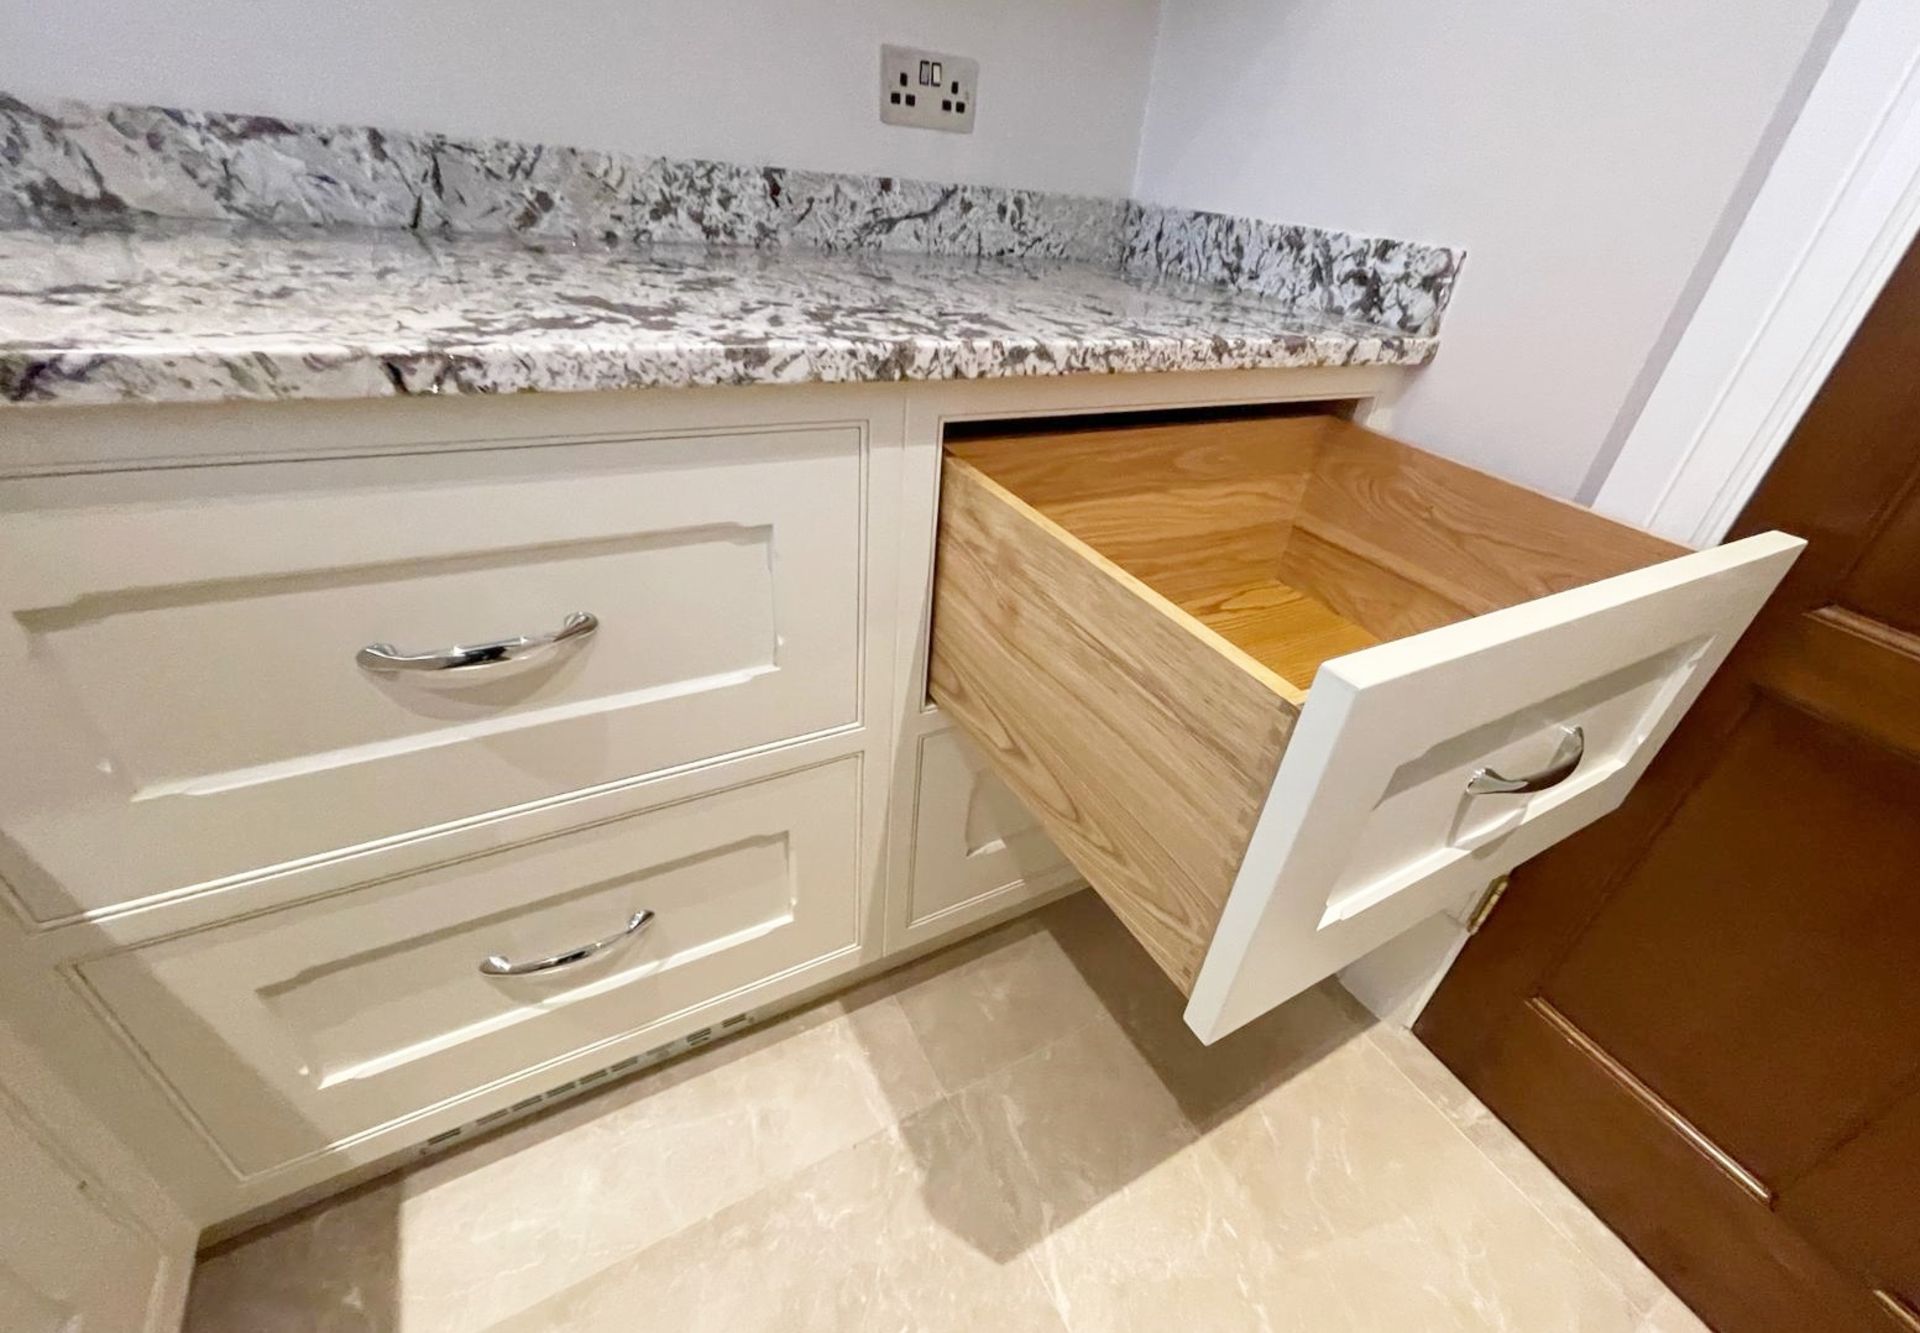 1 x Bespoke Fitted Solid Wood Kitchen with Natural Bianco Antico Grantite Work Surfaces - Image 32 of 61